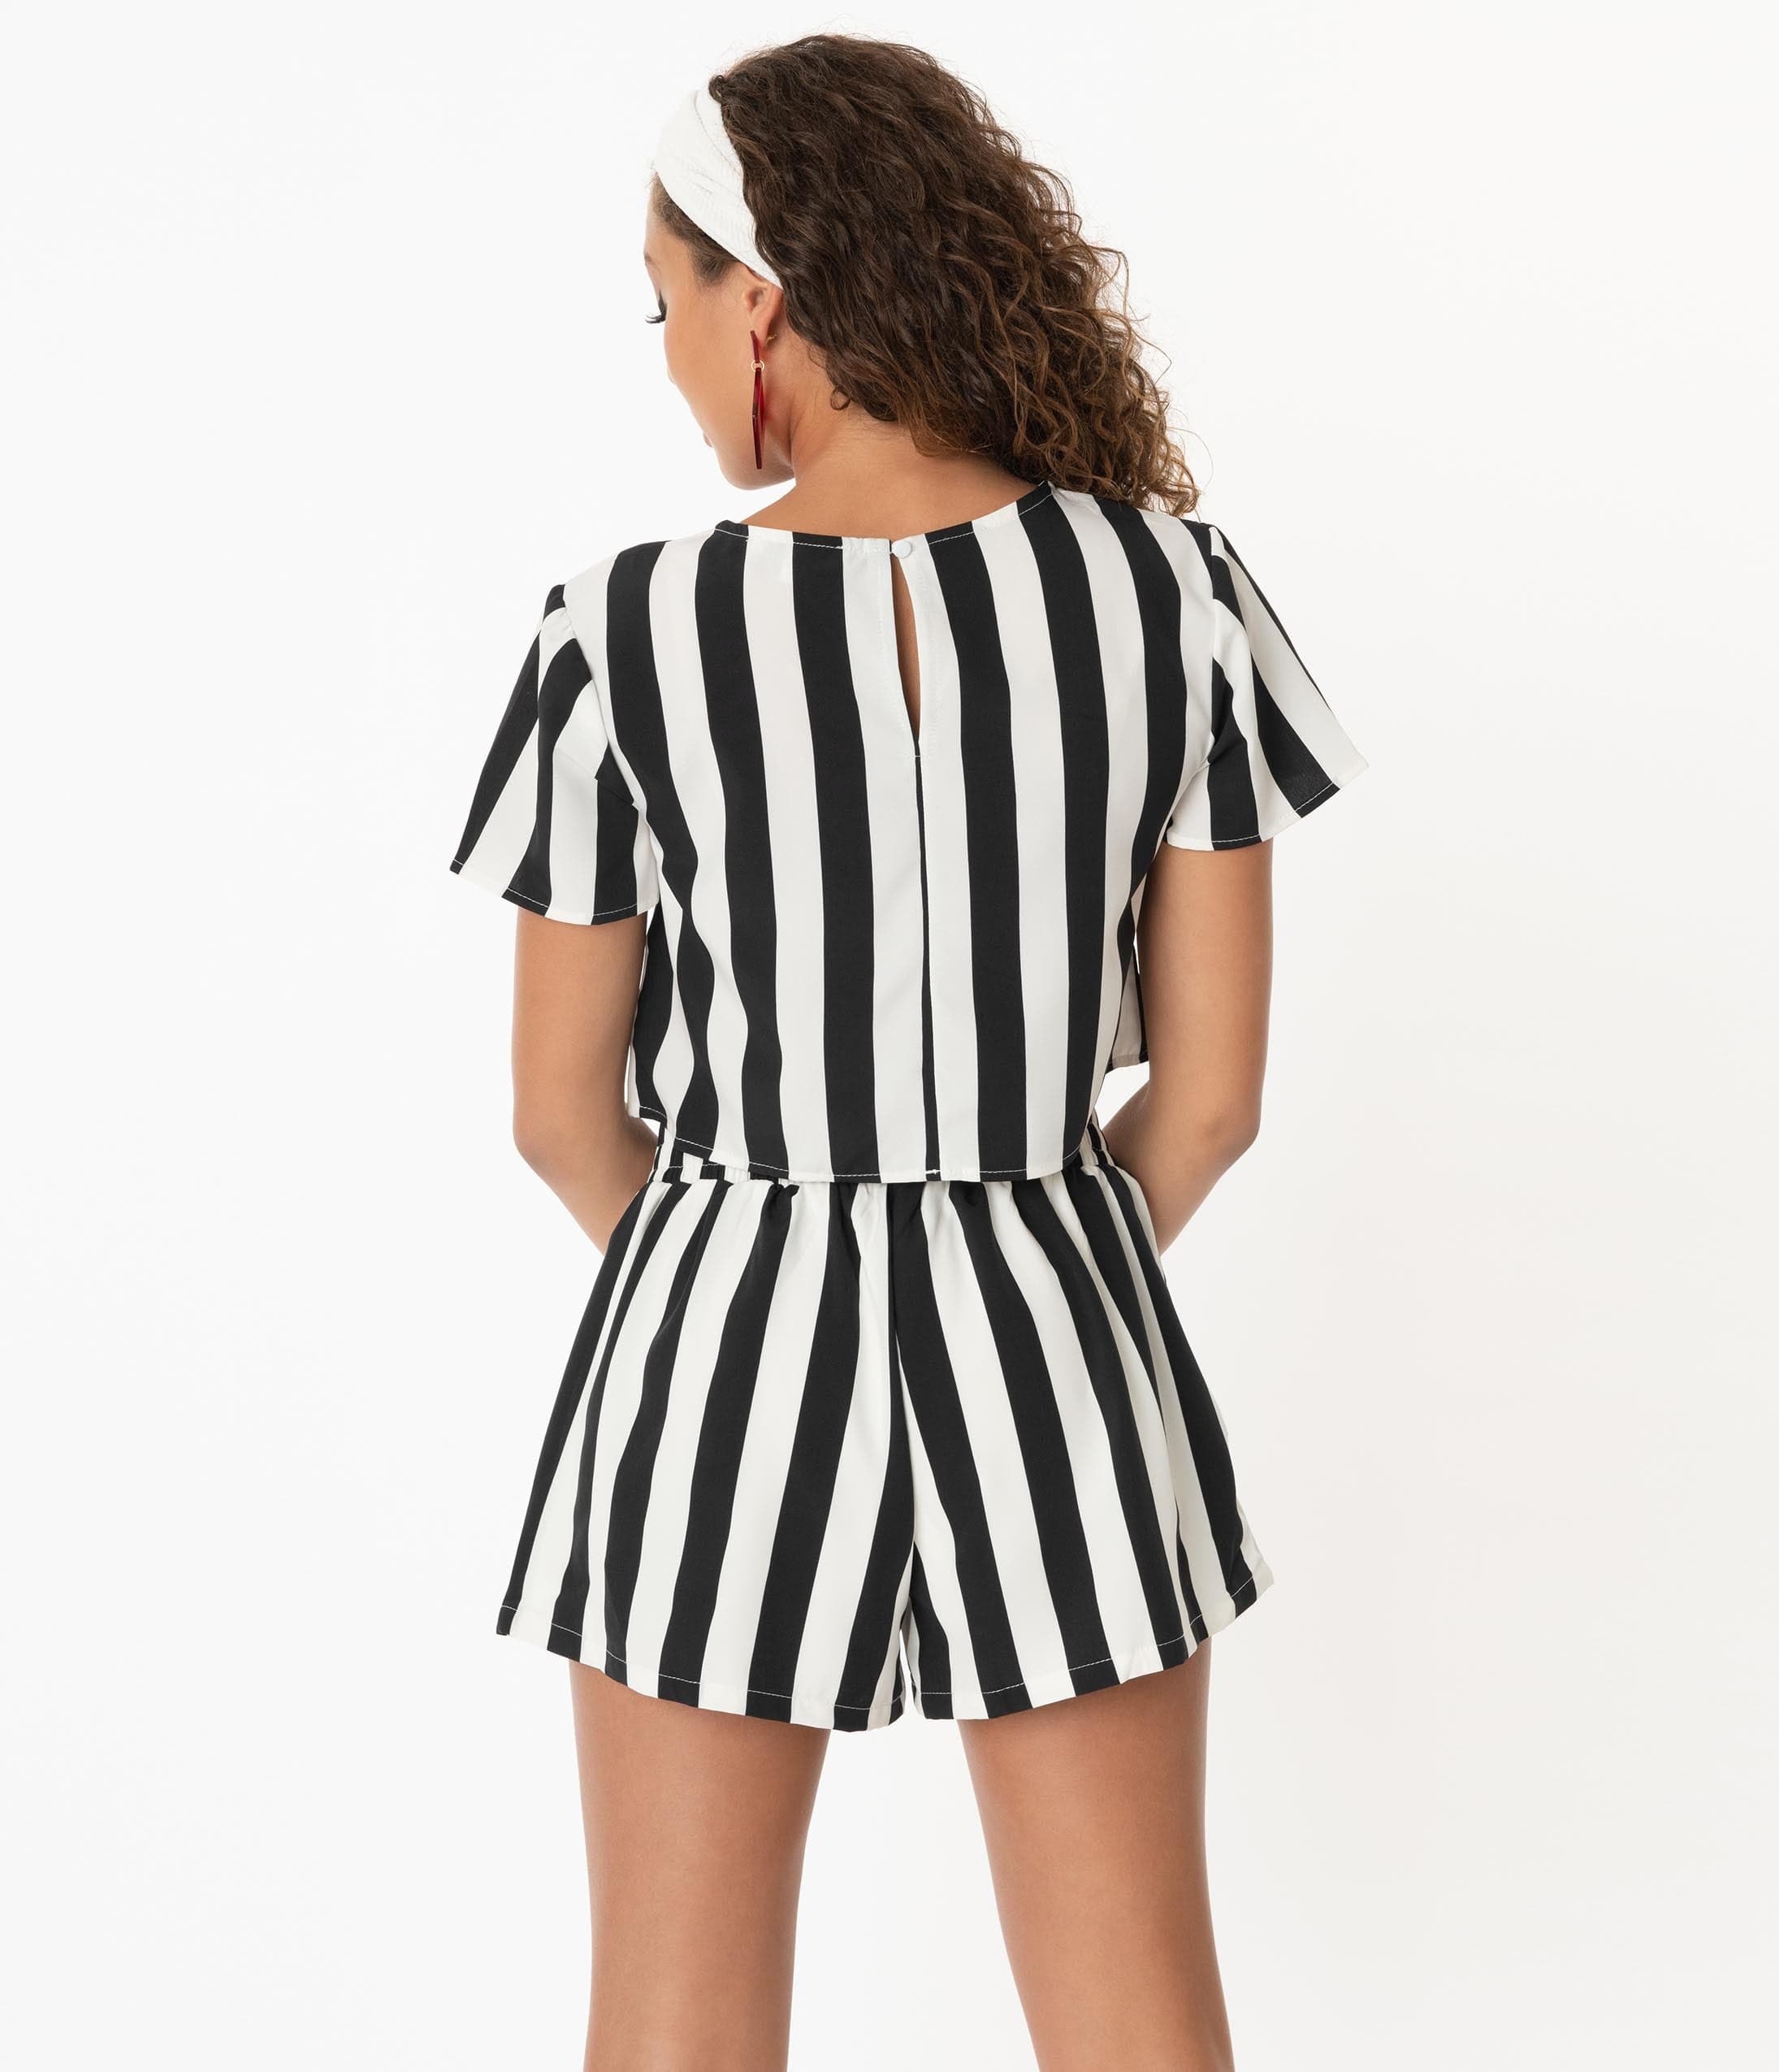 black and white striped romper outfit